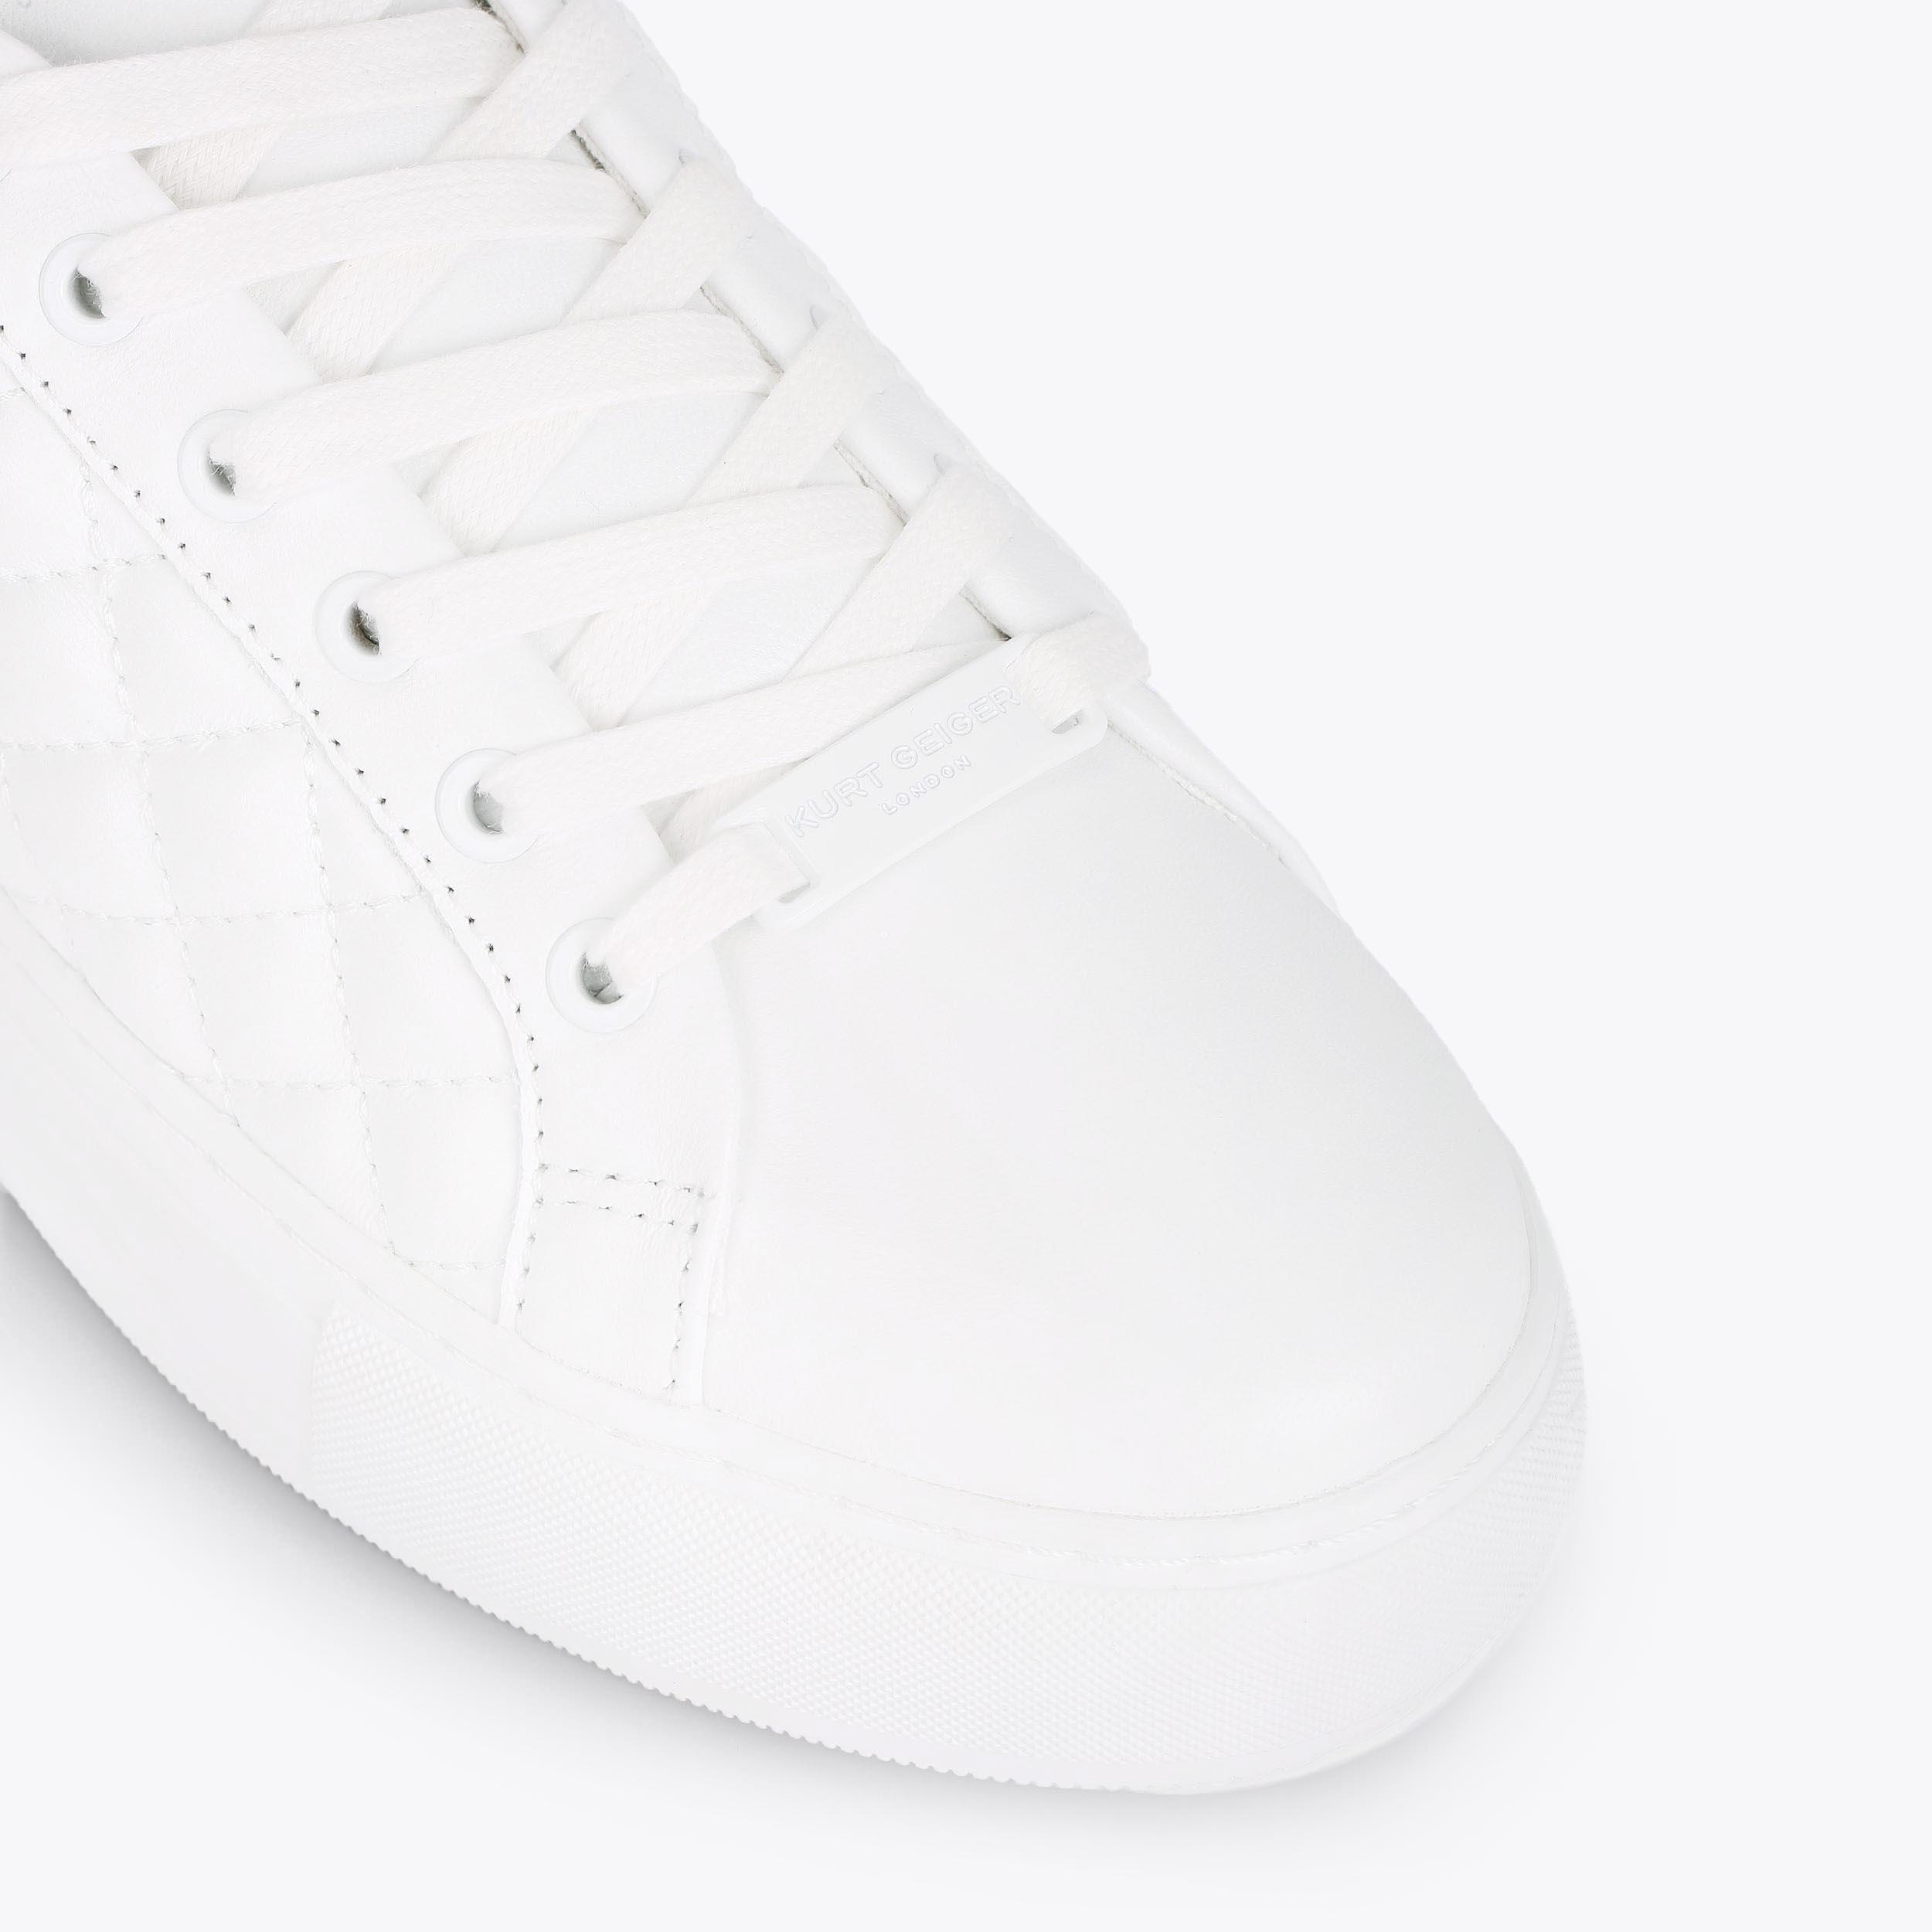 LANEY EAGLE DRENCH White Quilted Leather Chunky Sneakers by KURT GEIGER ...